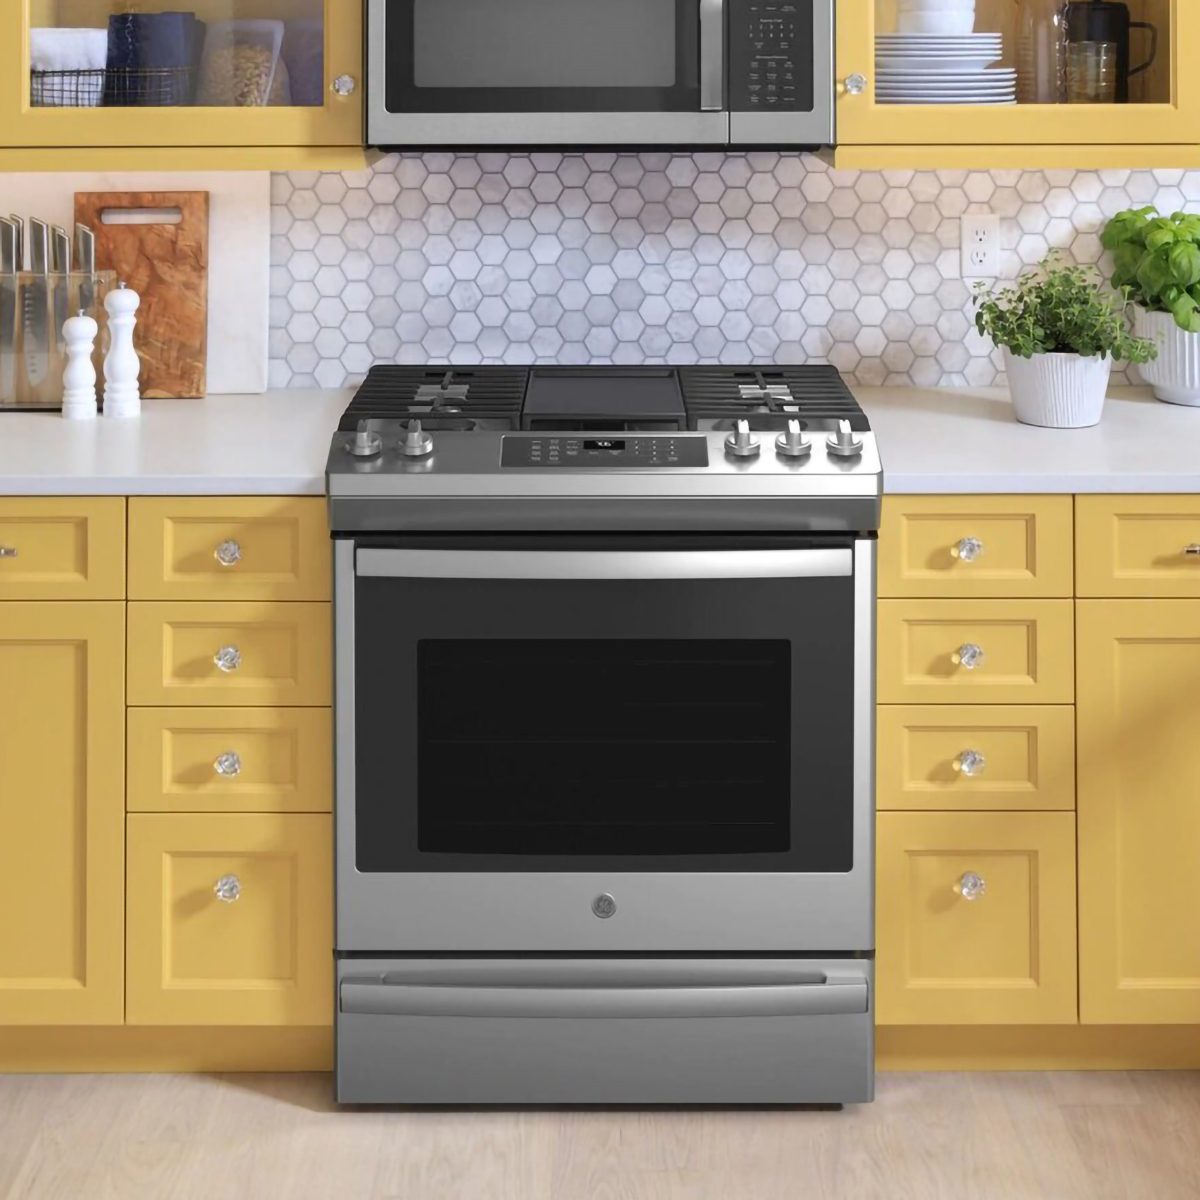 11 Best Presidents Day Appliance Sales: Save on Washers, Dryers, Refrigerators and Stoves